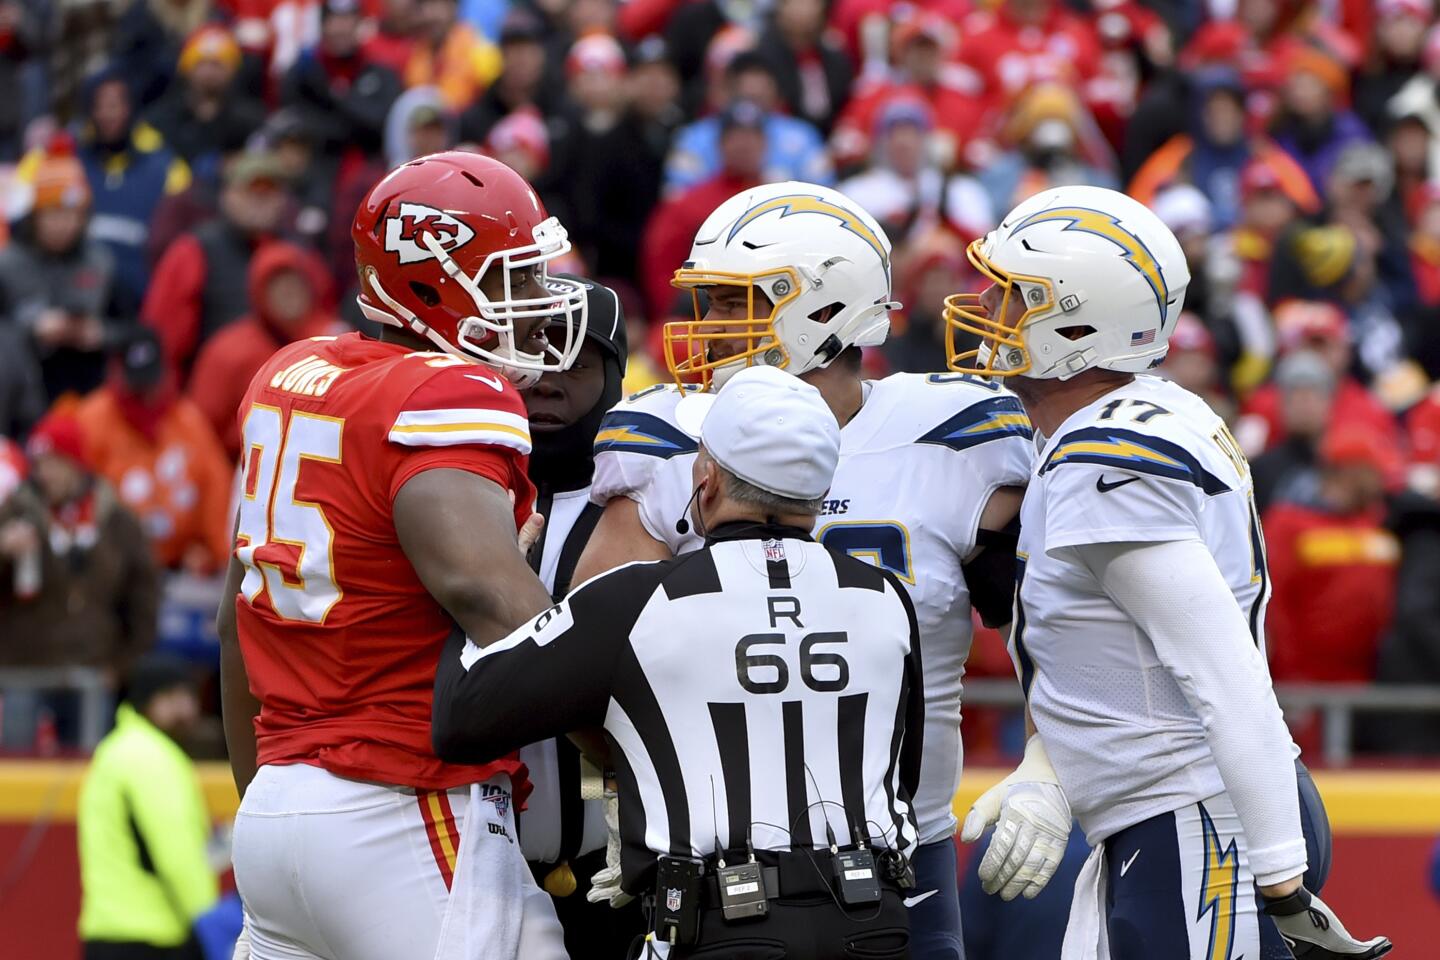 Chiefs defensive tackle Chris Jones (95) and Chargers quarterback Philip Rivers (17) get into it during a game Sunday.